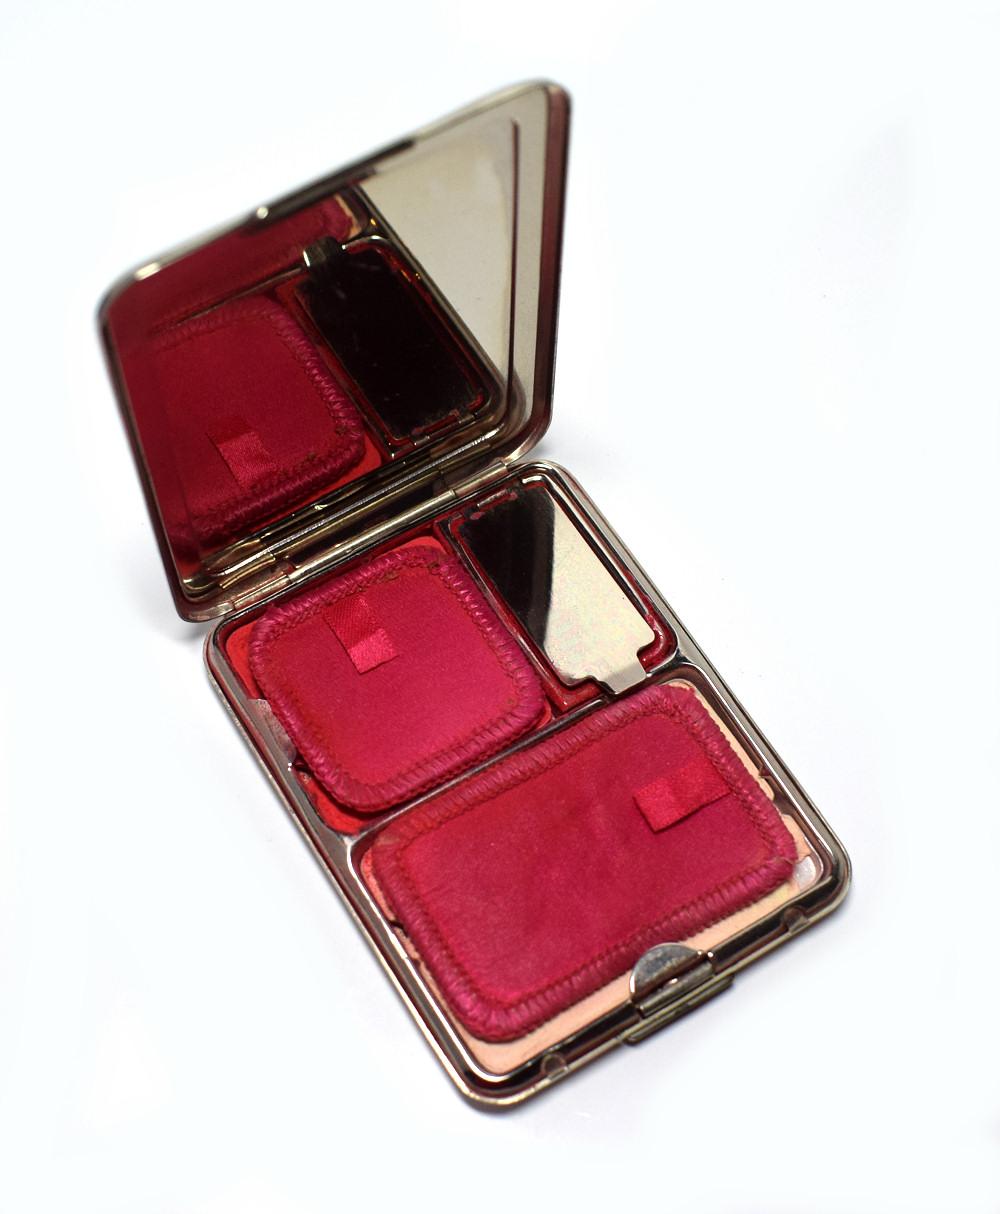 Early 1930s Art Deco Richard Hudnut Du Barry powder compact with remnants of the fine texture face powder in two-tones of bright red. Du Barry scent is still detectable despite the age of the powder. The back of the compact is engine turned with